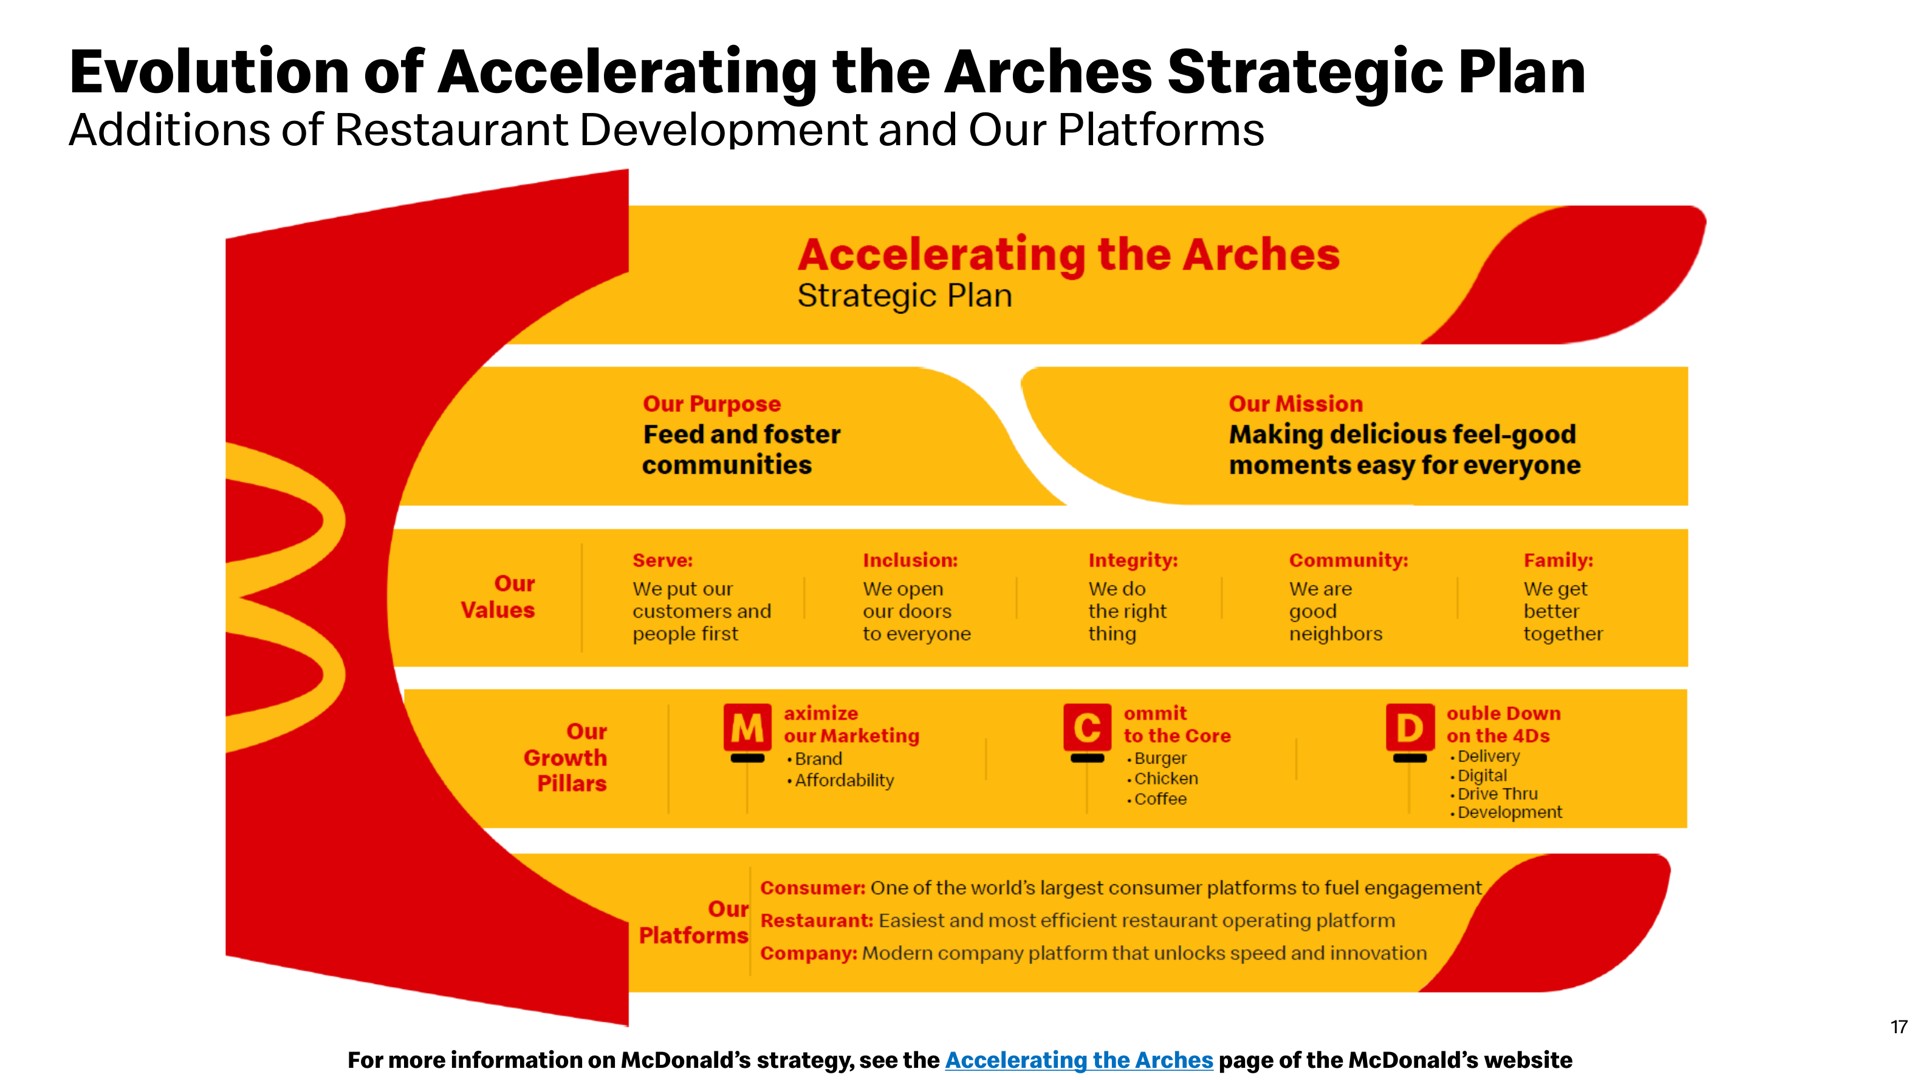 evolution of accelerating the arches strategic plan | McDonald's